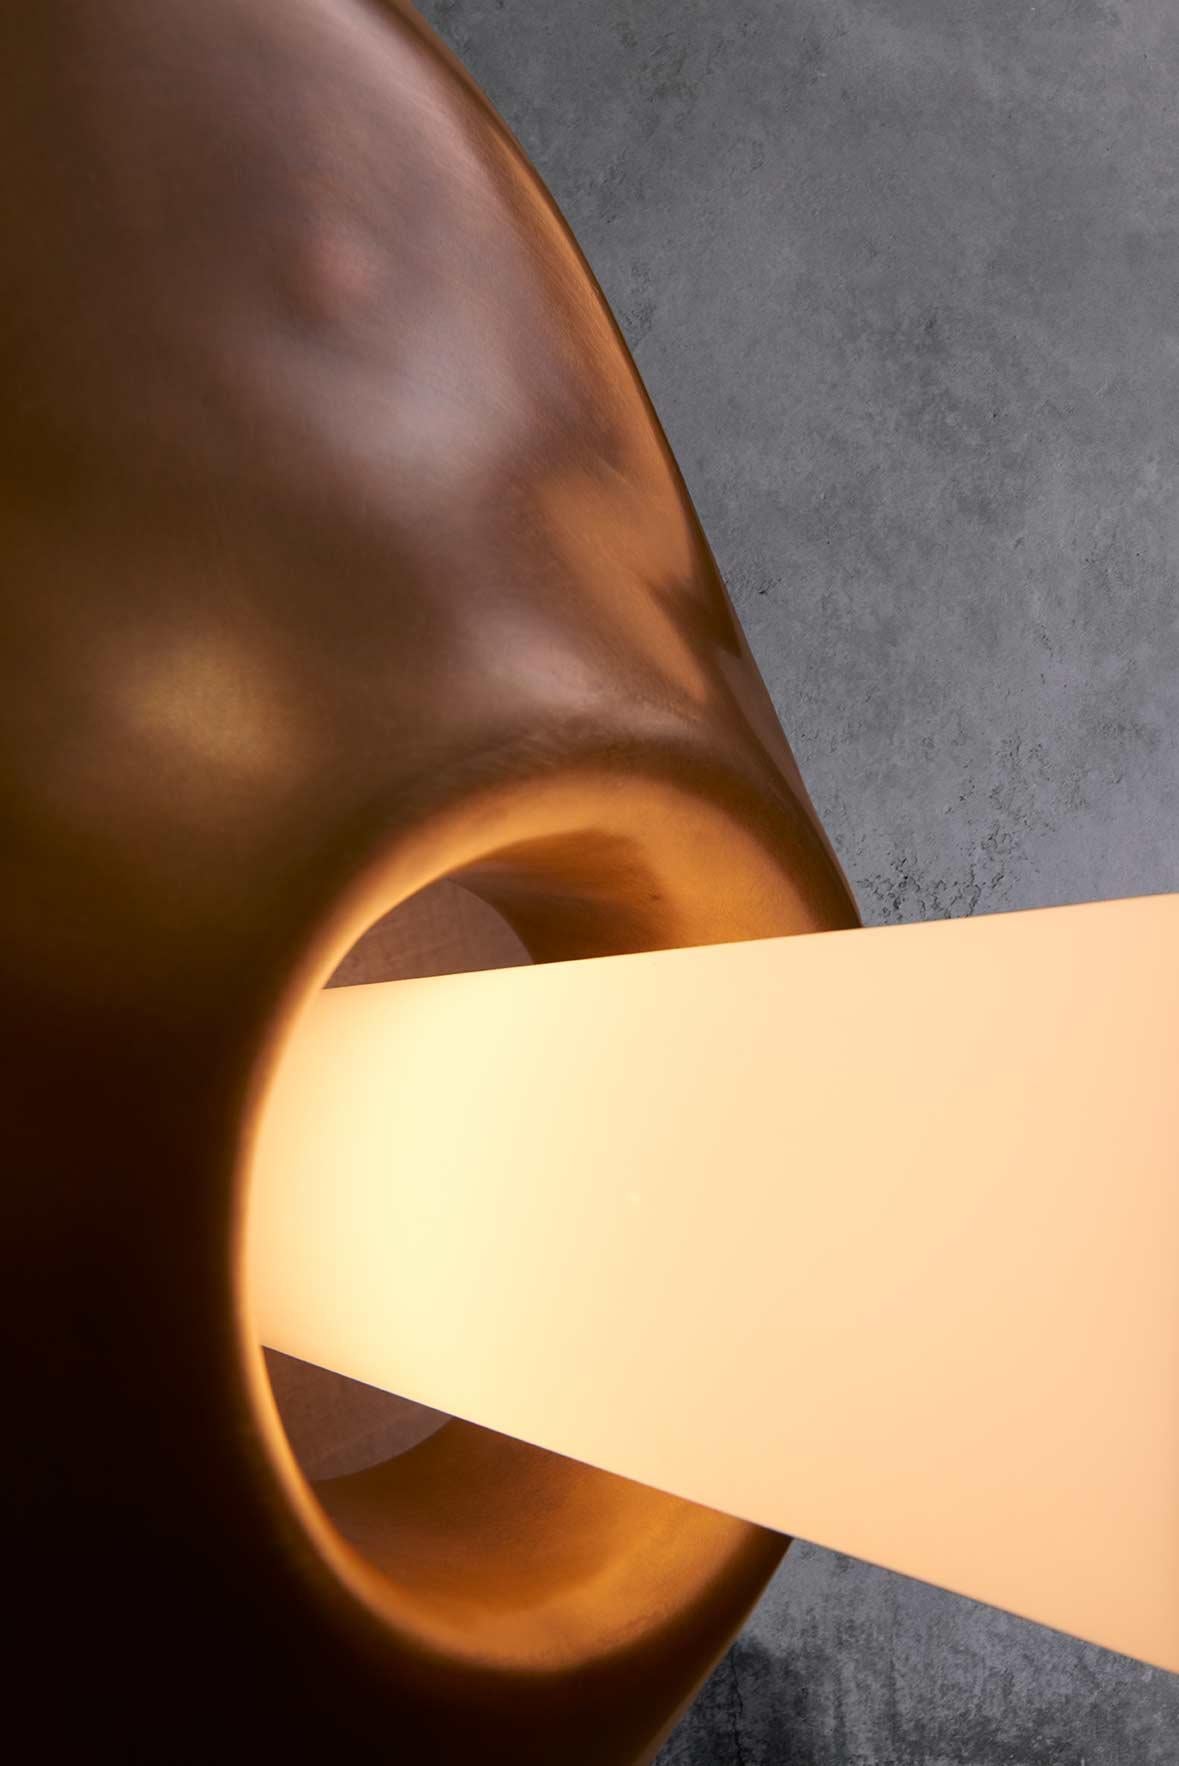 Clay sculpture is cast in bronze, hand blown glass is then added to complete this sculptural light form. Available as a sconce or a pendant. Shown here as a sconce.

Materials: Bronze, Glass.

Dimensions: W – 11-3/8?, H – 14?, D –